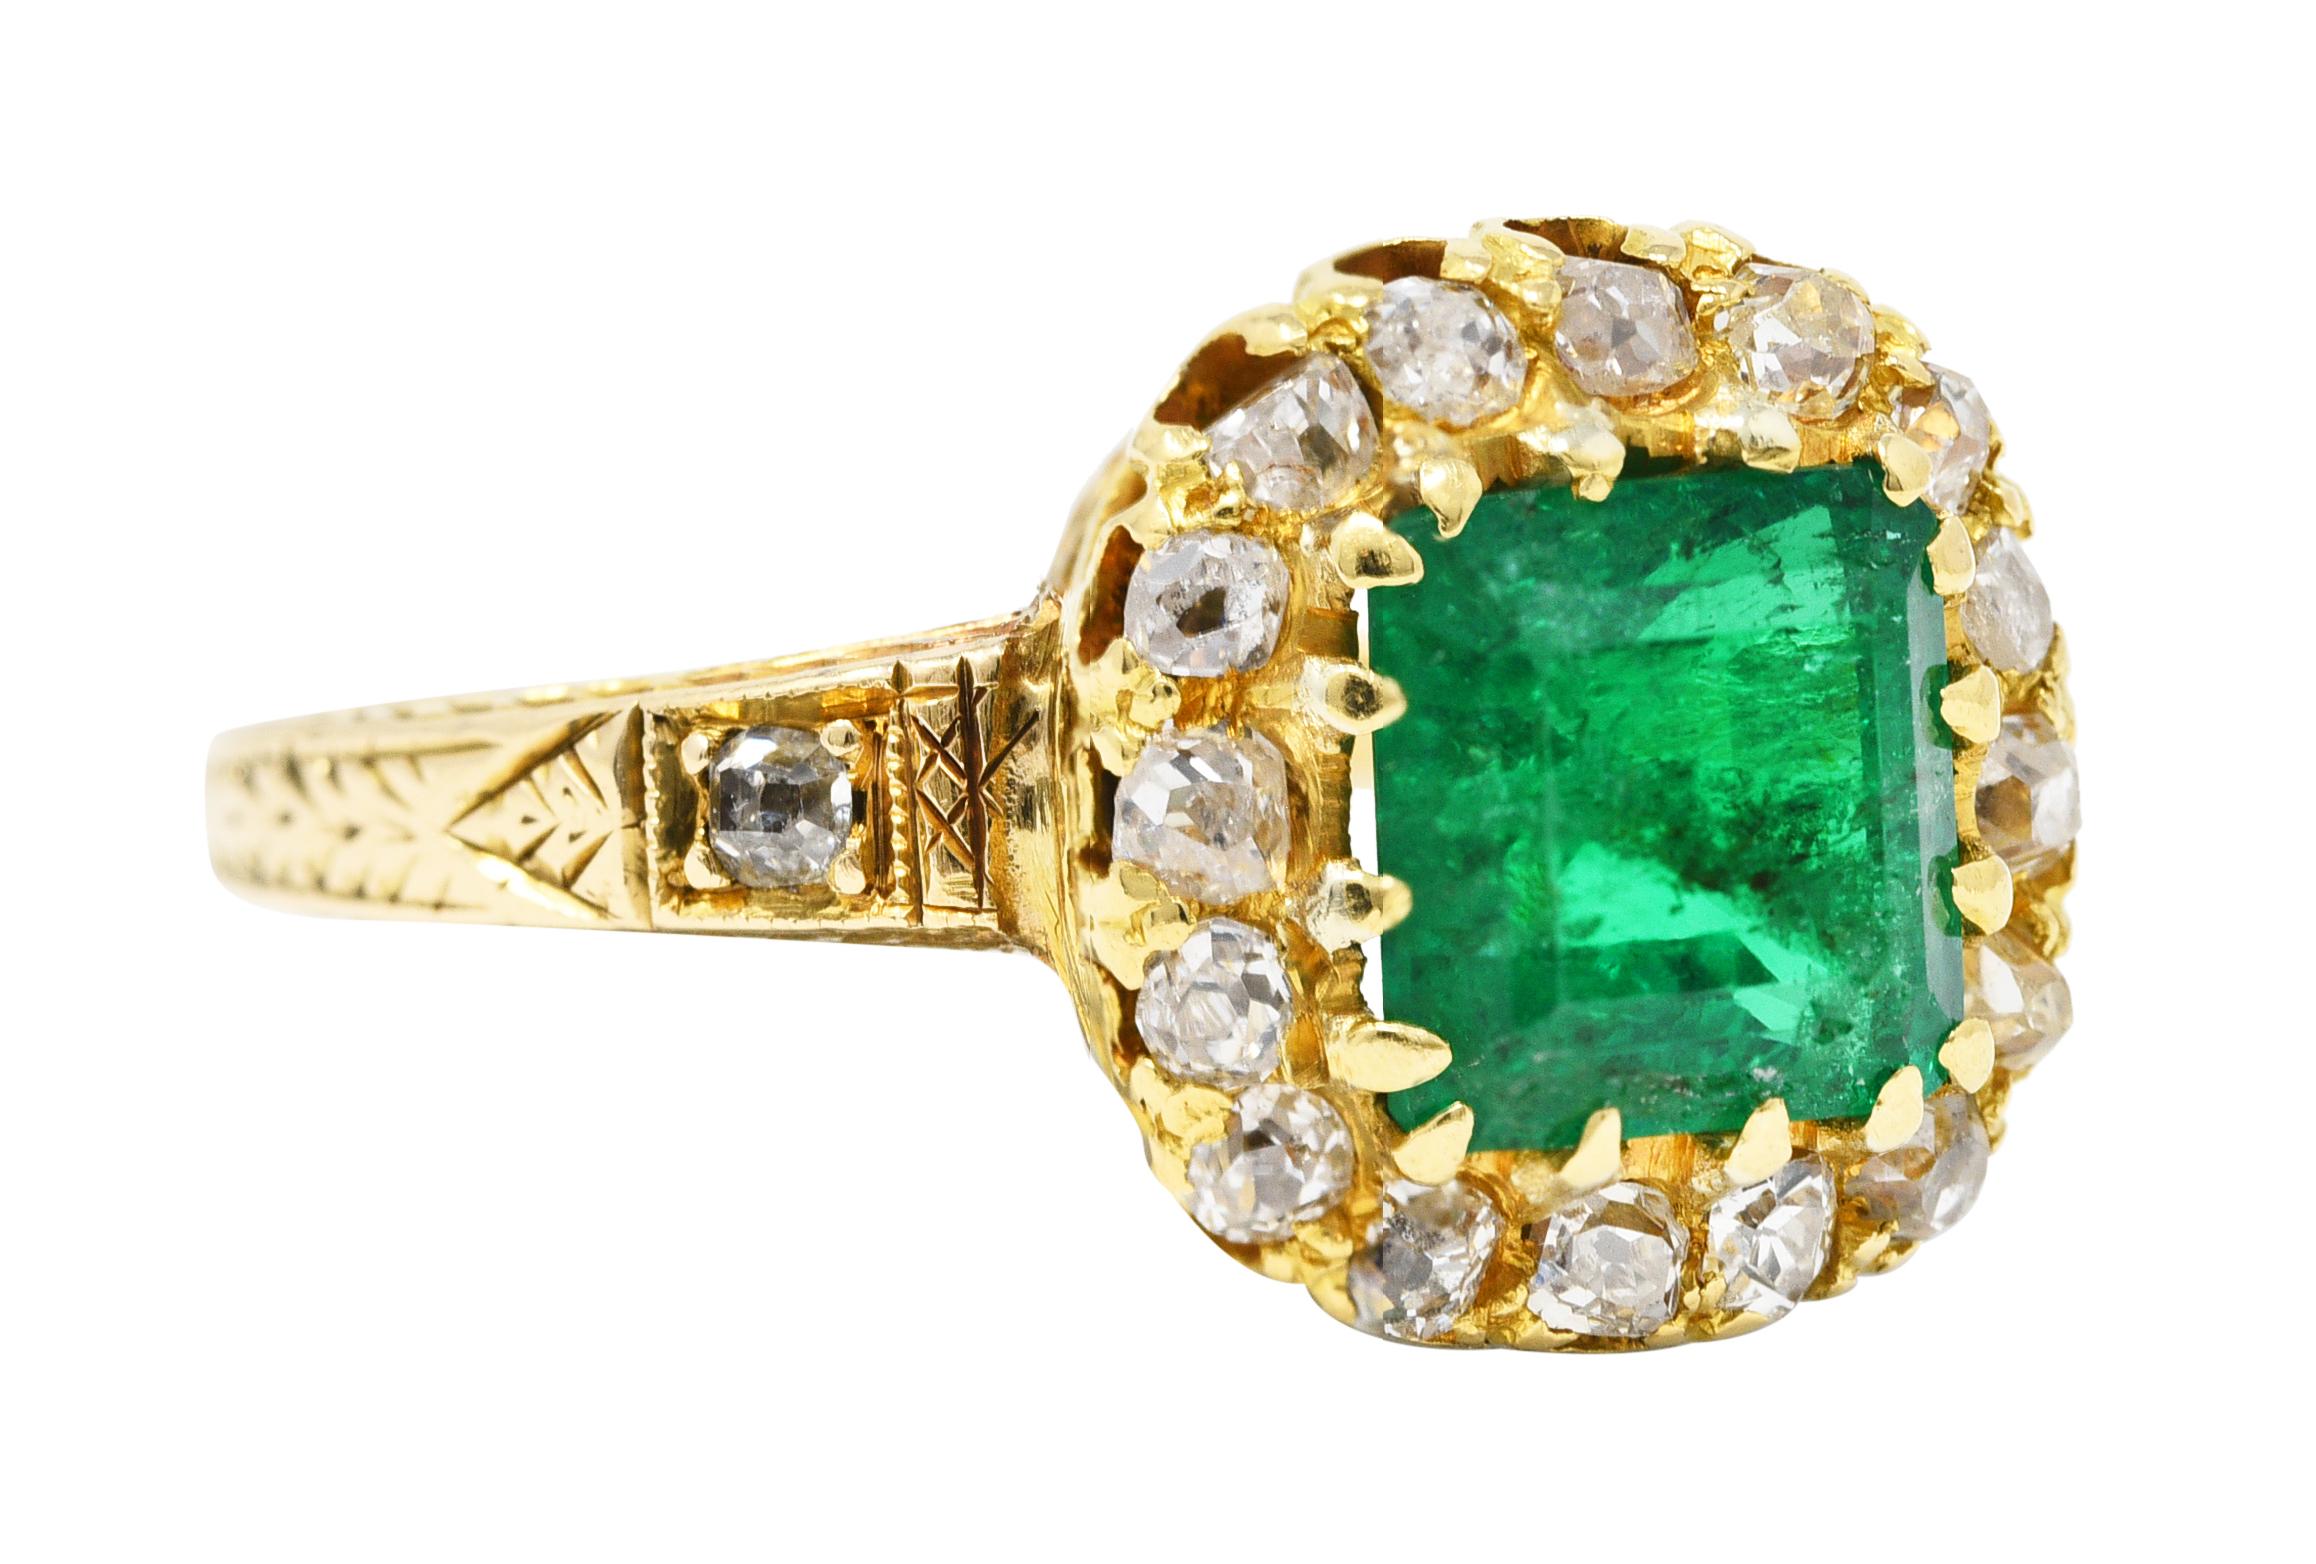 Centering a square emerald cut emerald weighing approximately 1.52 carats. Transparent vibrant green with medium saturation and natural inclusions. Prong set with a halo surround and shoulders set with old mine cut diamonds. Bead and prong set and